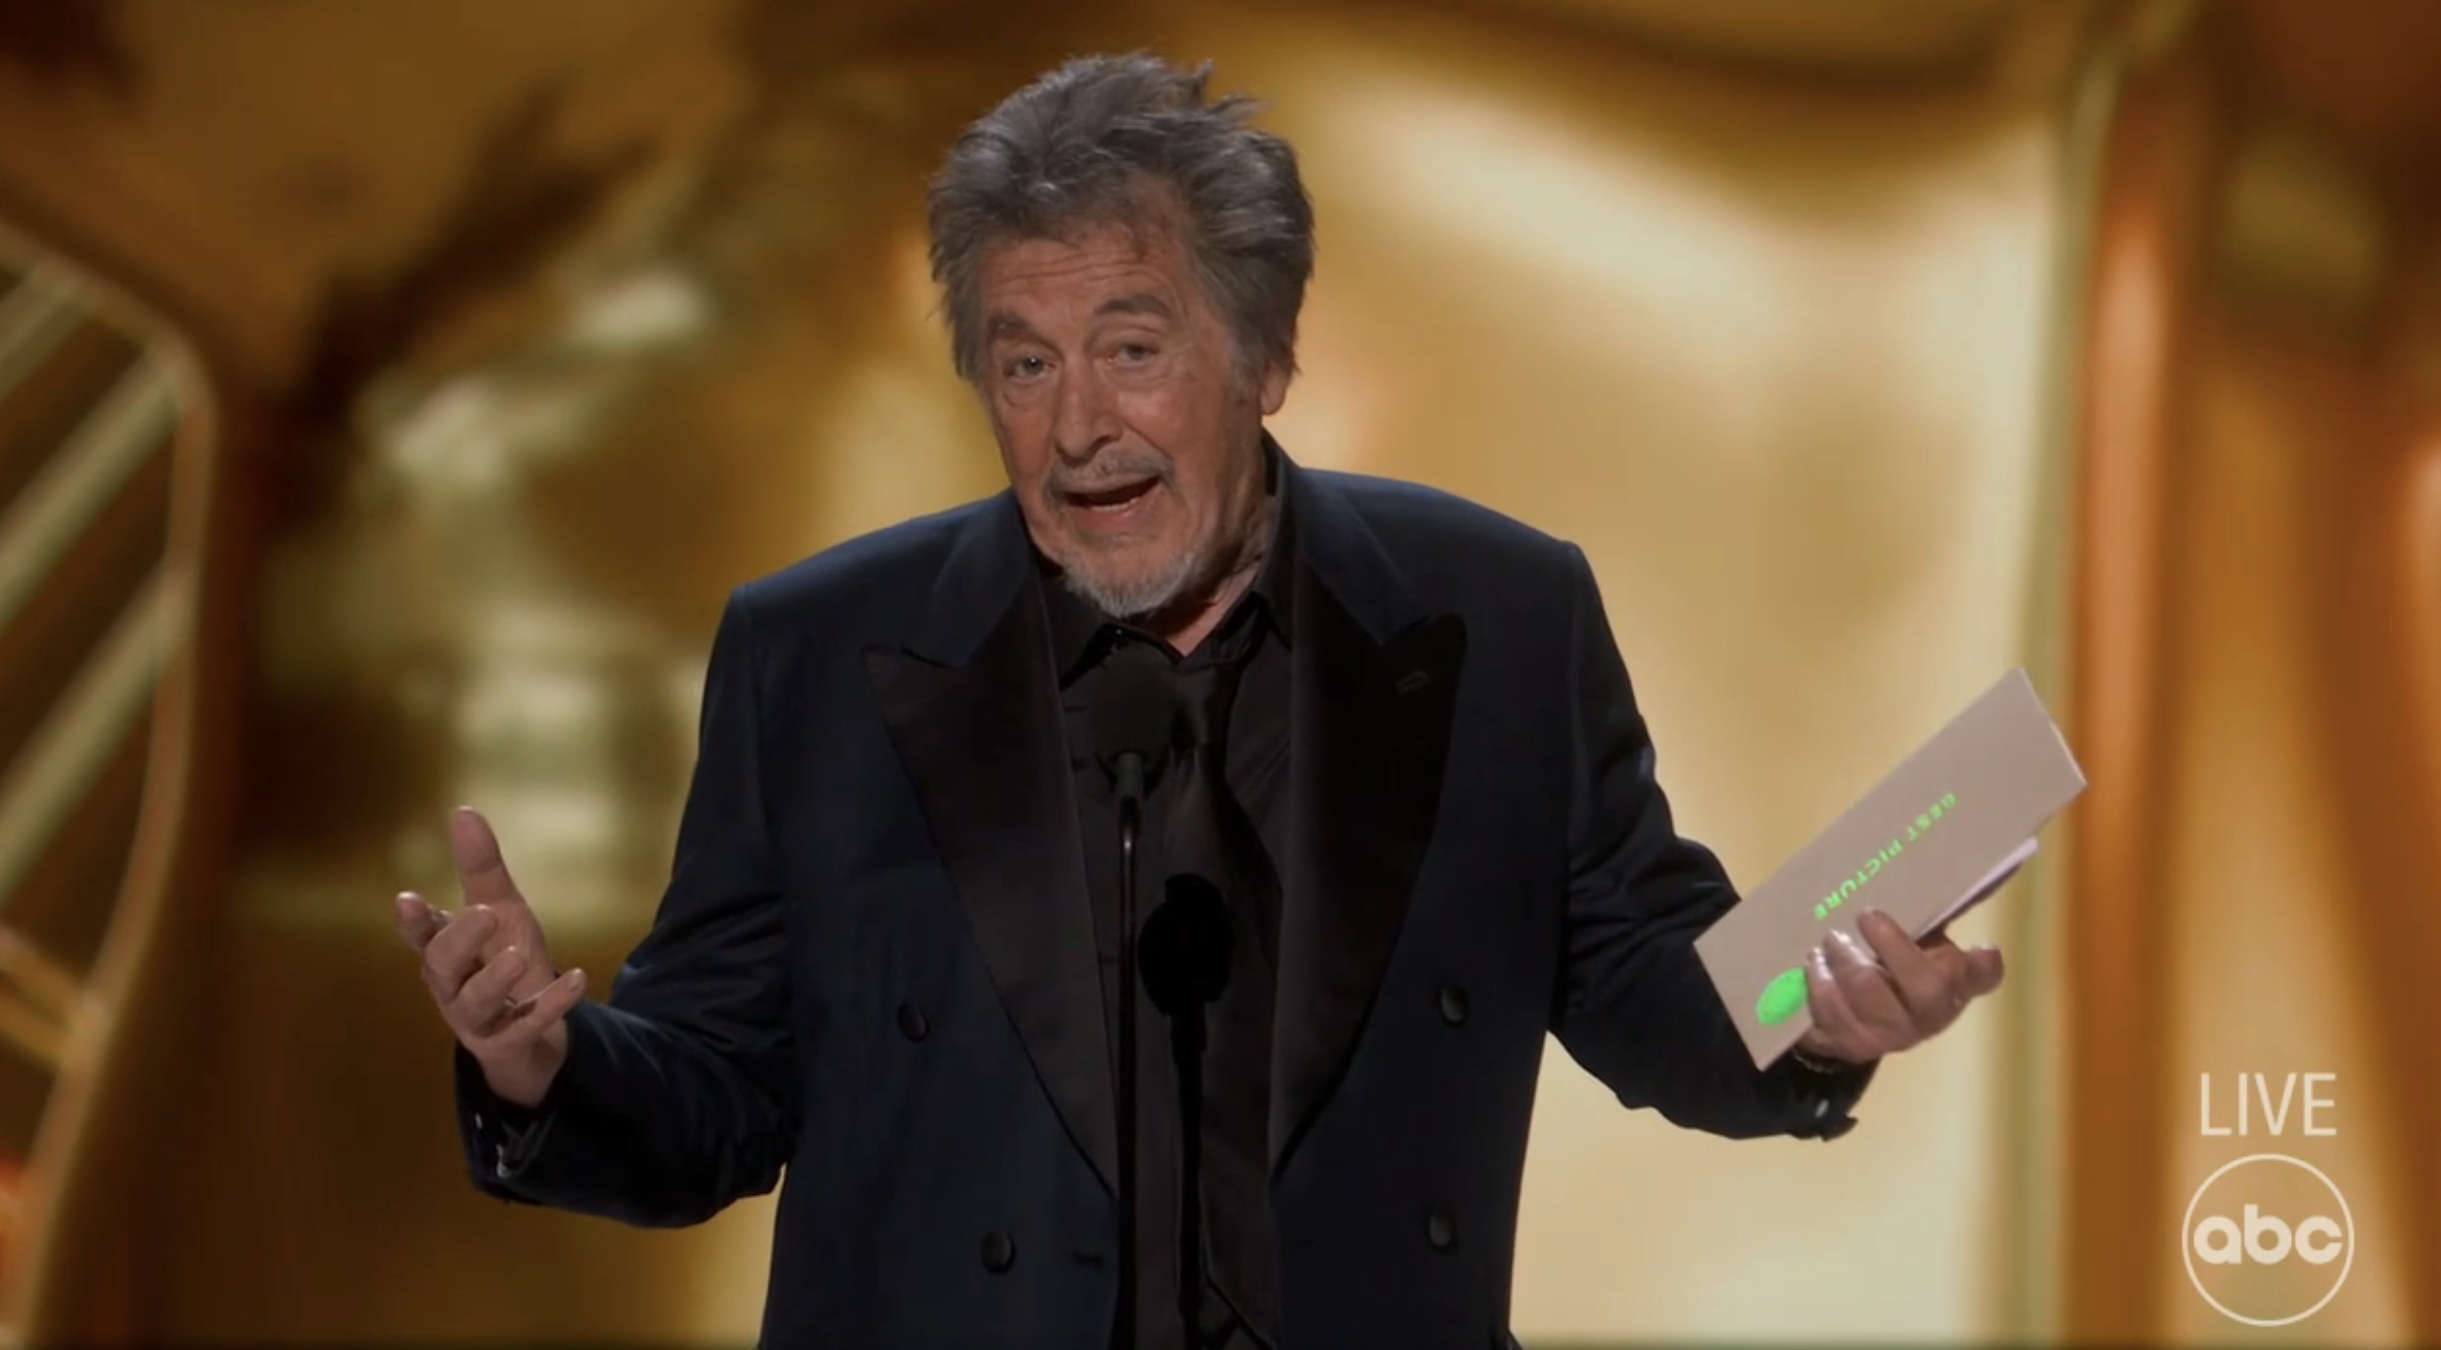 Al Pacino speaks on stage at an awards show, holding an envelope and gesturing with his hand